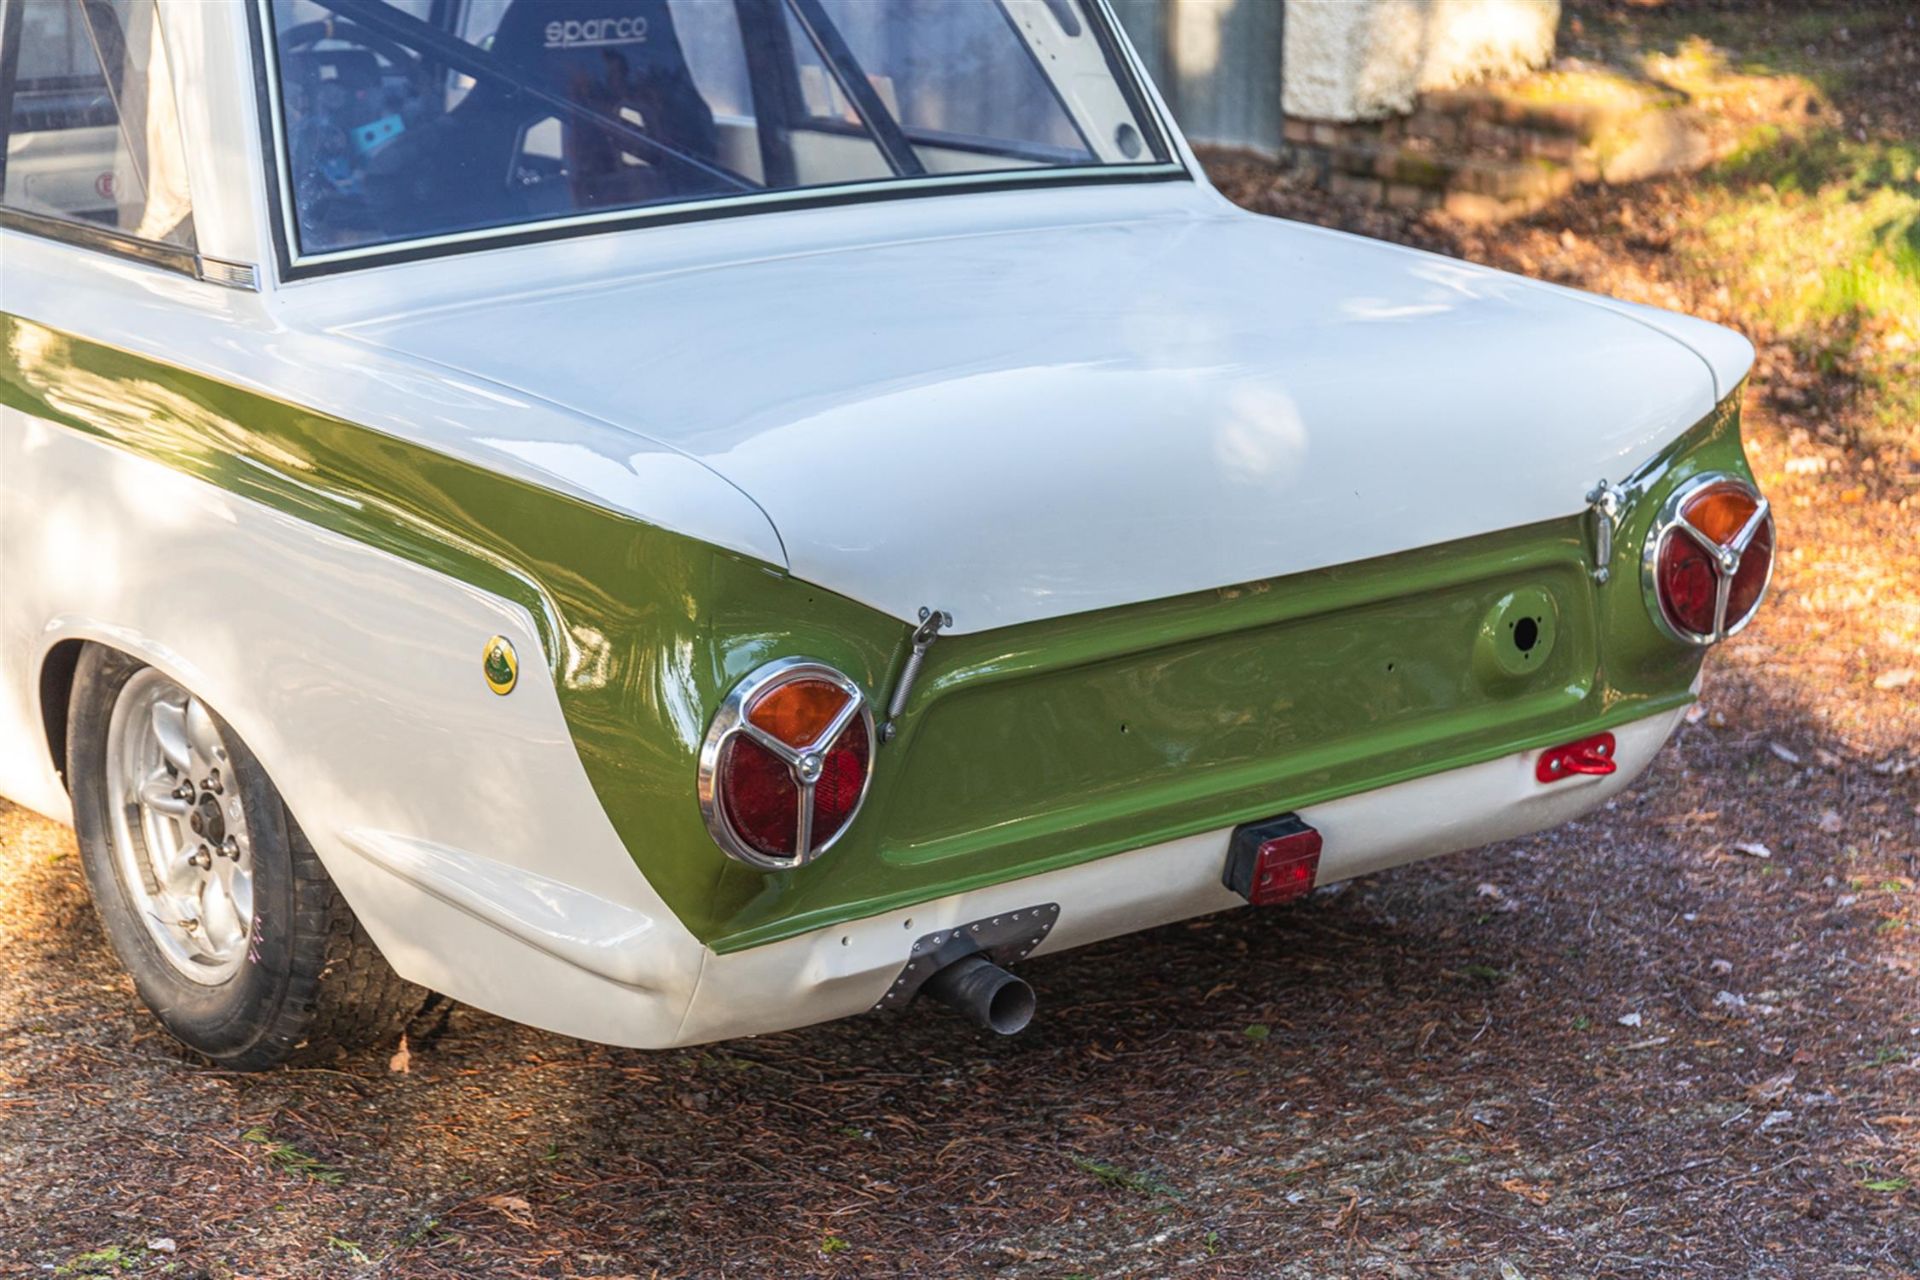 1964 Ford Lotus Cortina Competition Car - Image 9 of 10